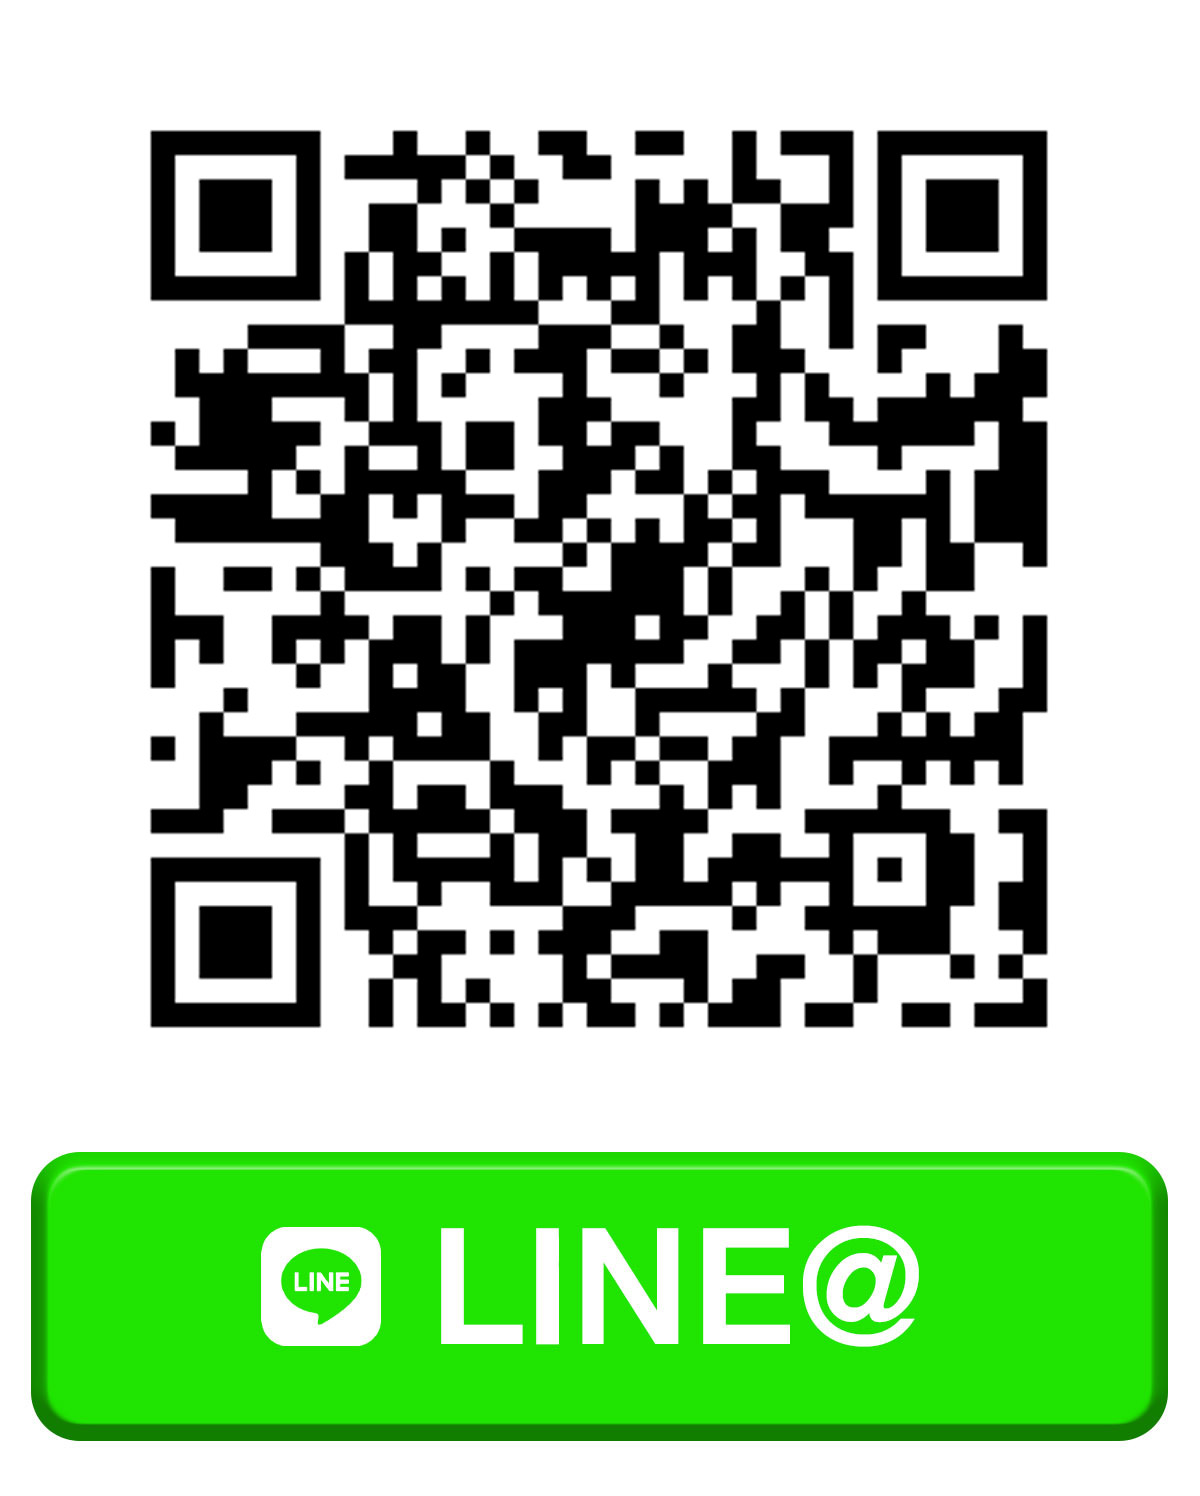 Contact us LINE image